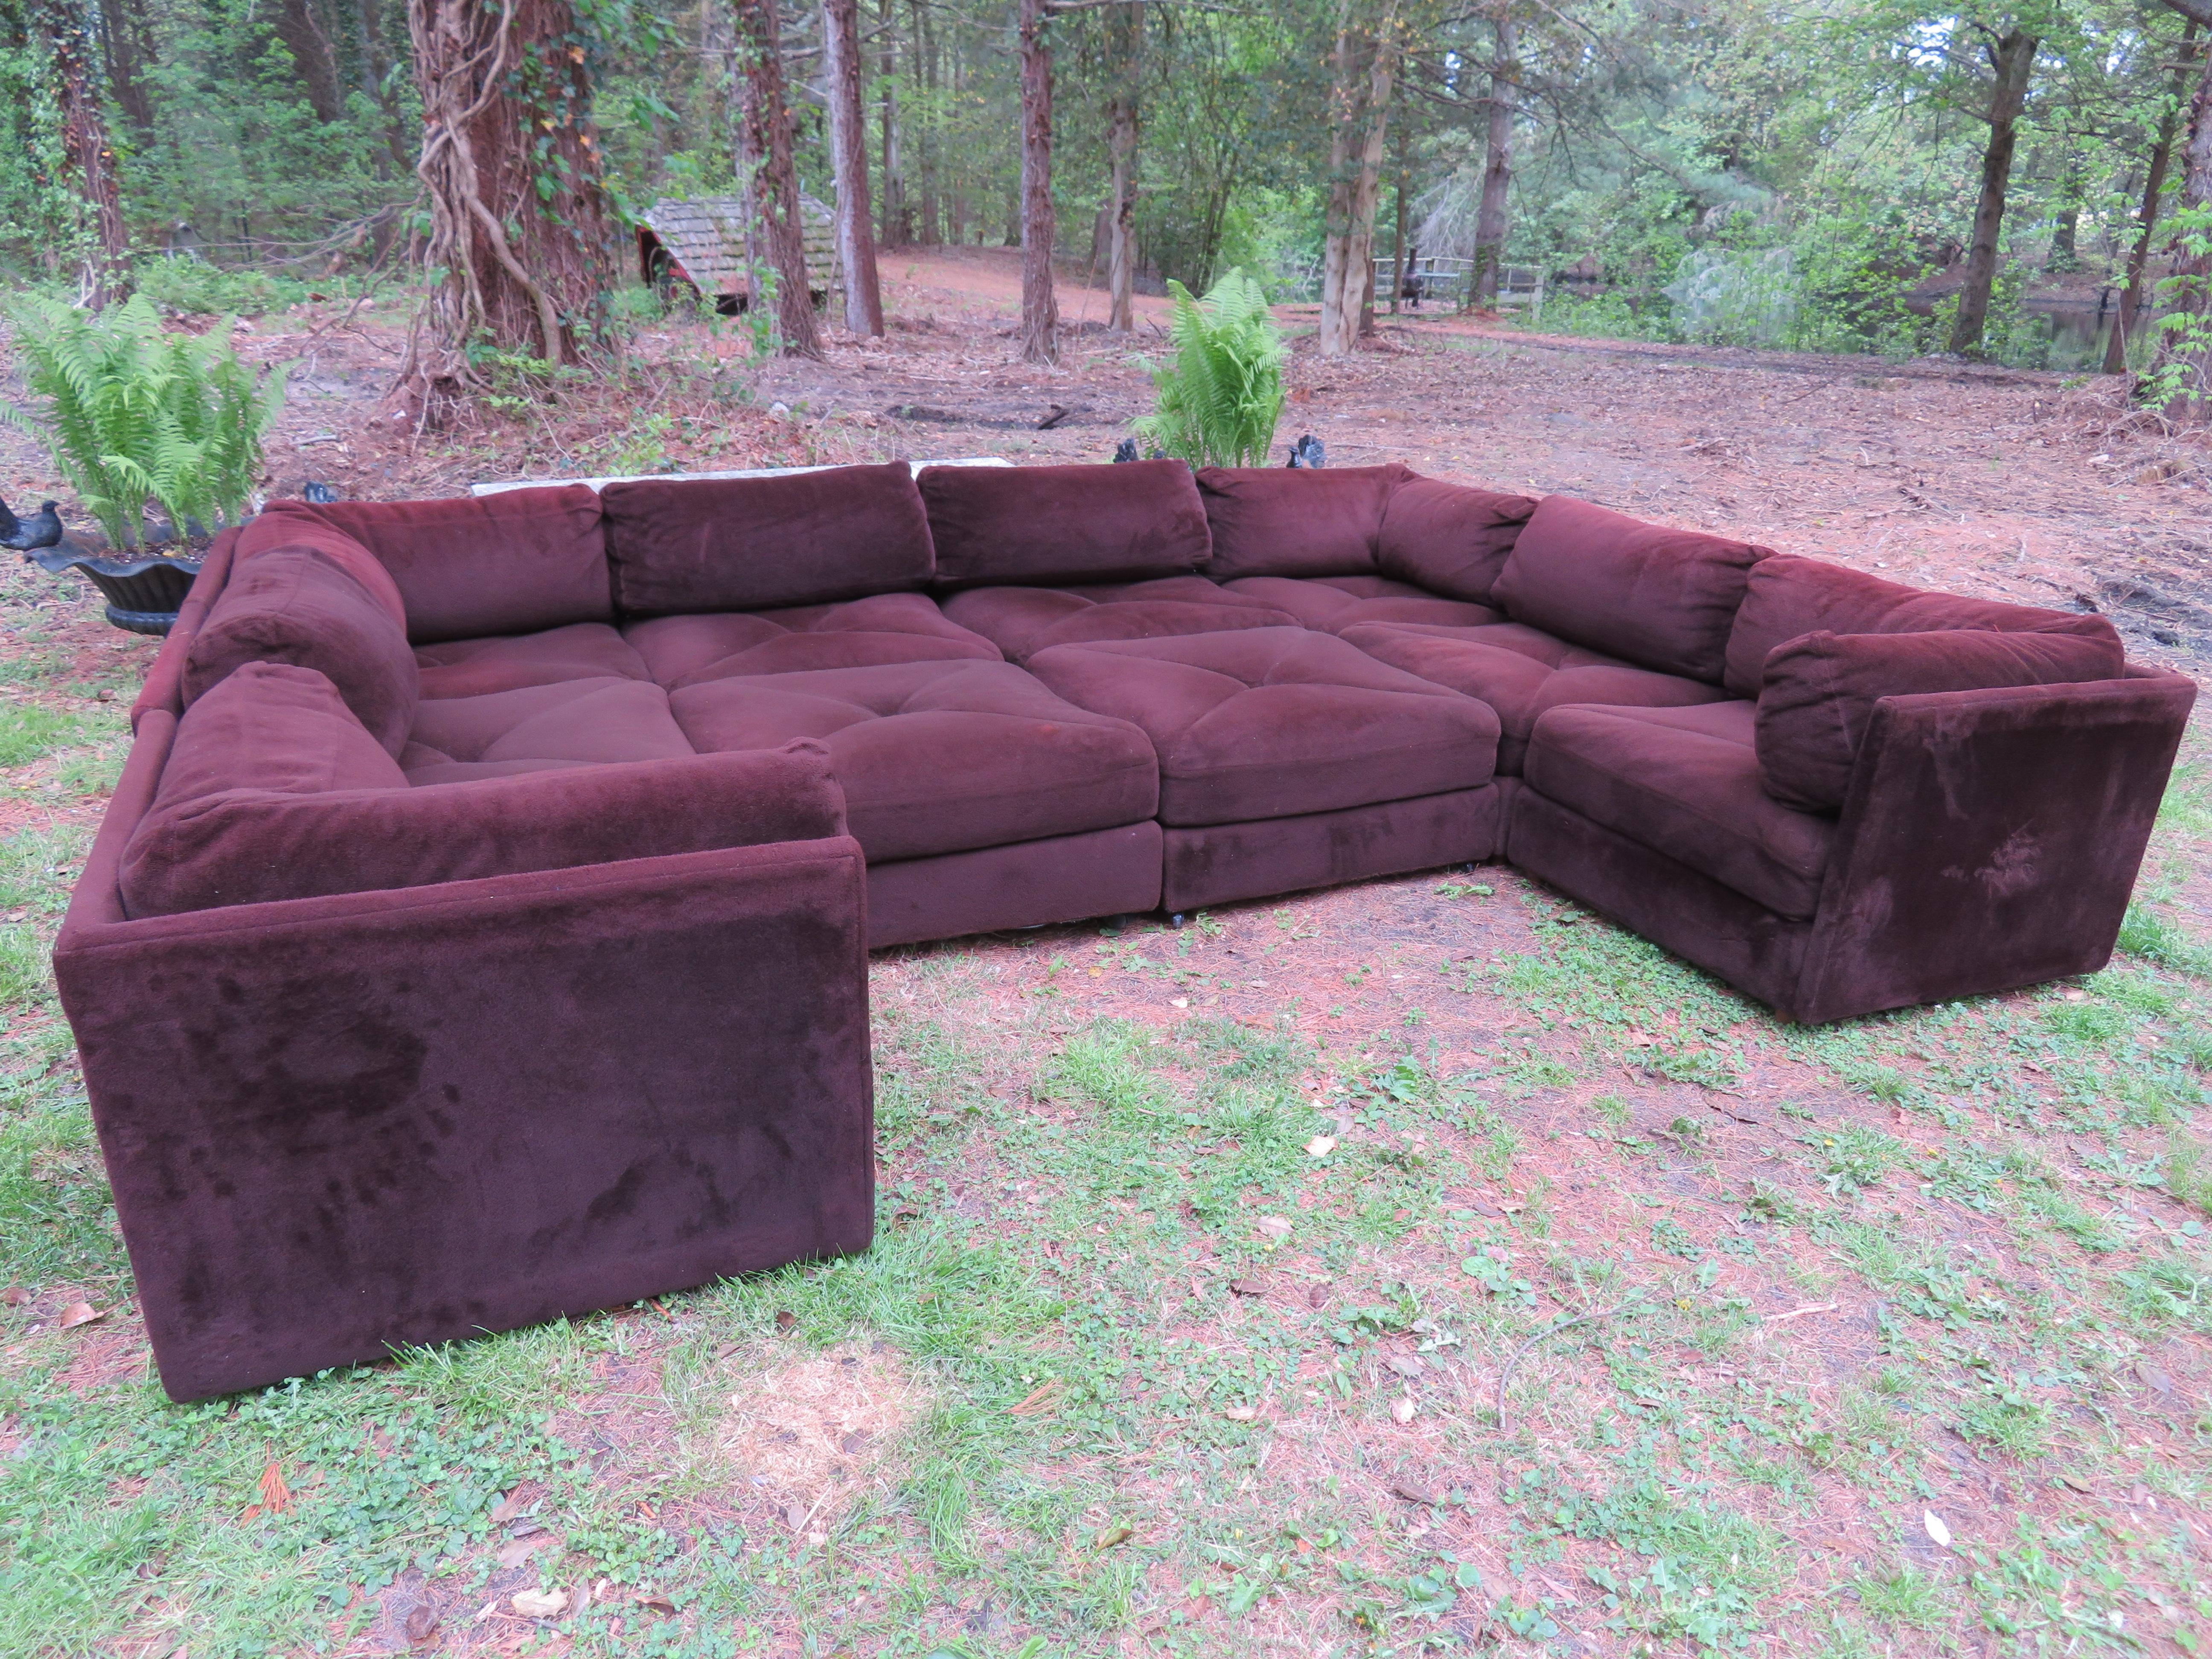 Huge ten-piece Milo Baughman style sectional sofa by Selig. We love this pit style cube sectional sofa and so will you-great for family rooms or man caves. This set includes four corner sections measuring 32